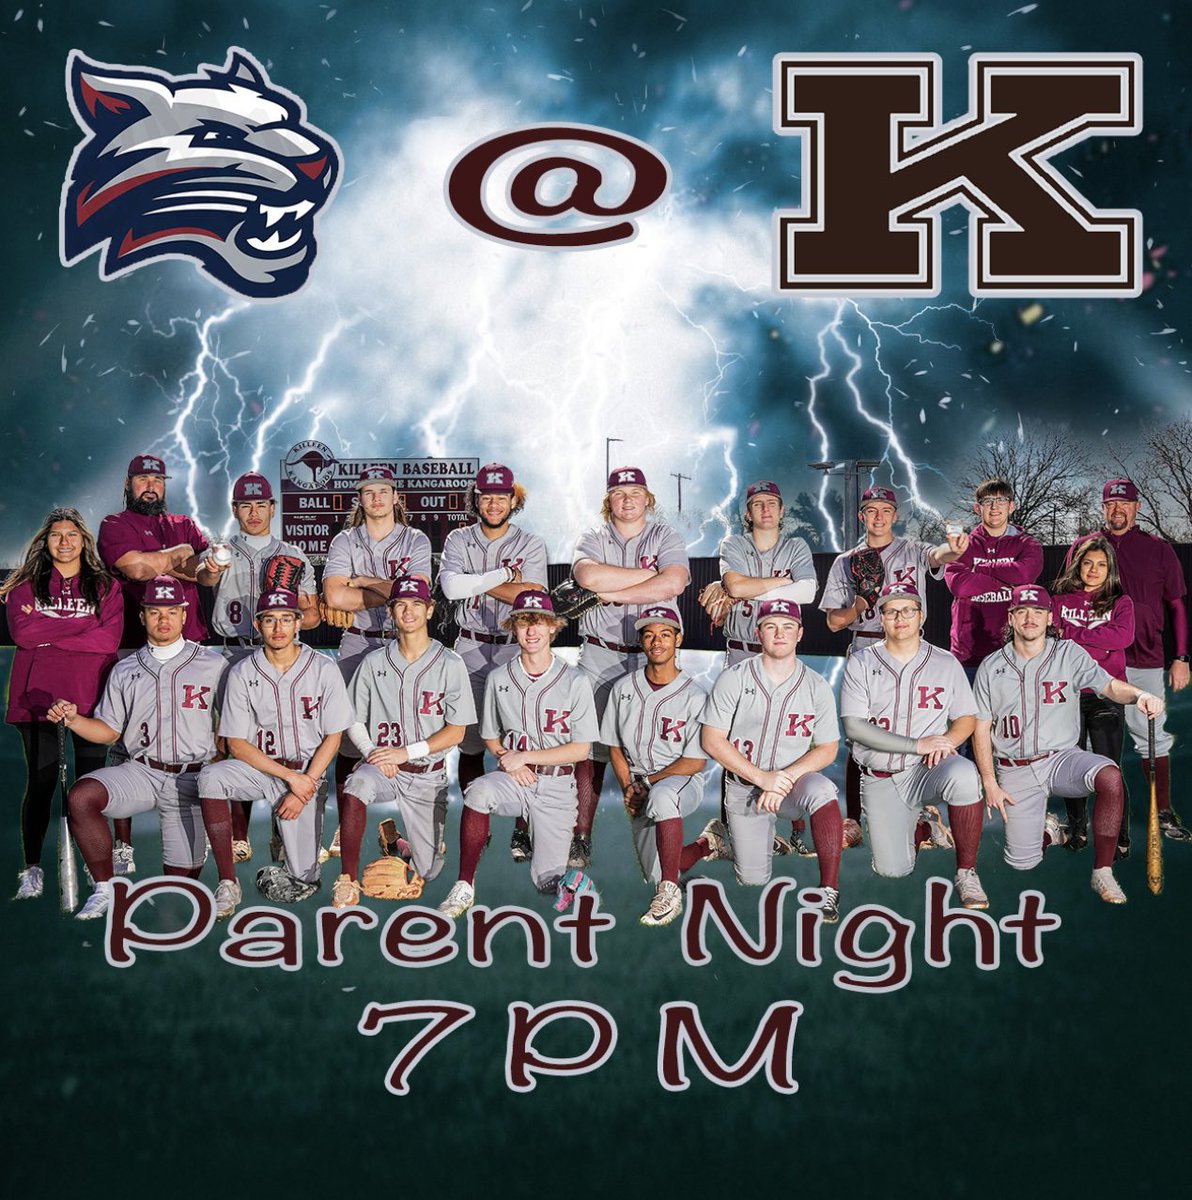 Come support us tonight at Killeen High baseball field as we take on Chaparral #FAMILY